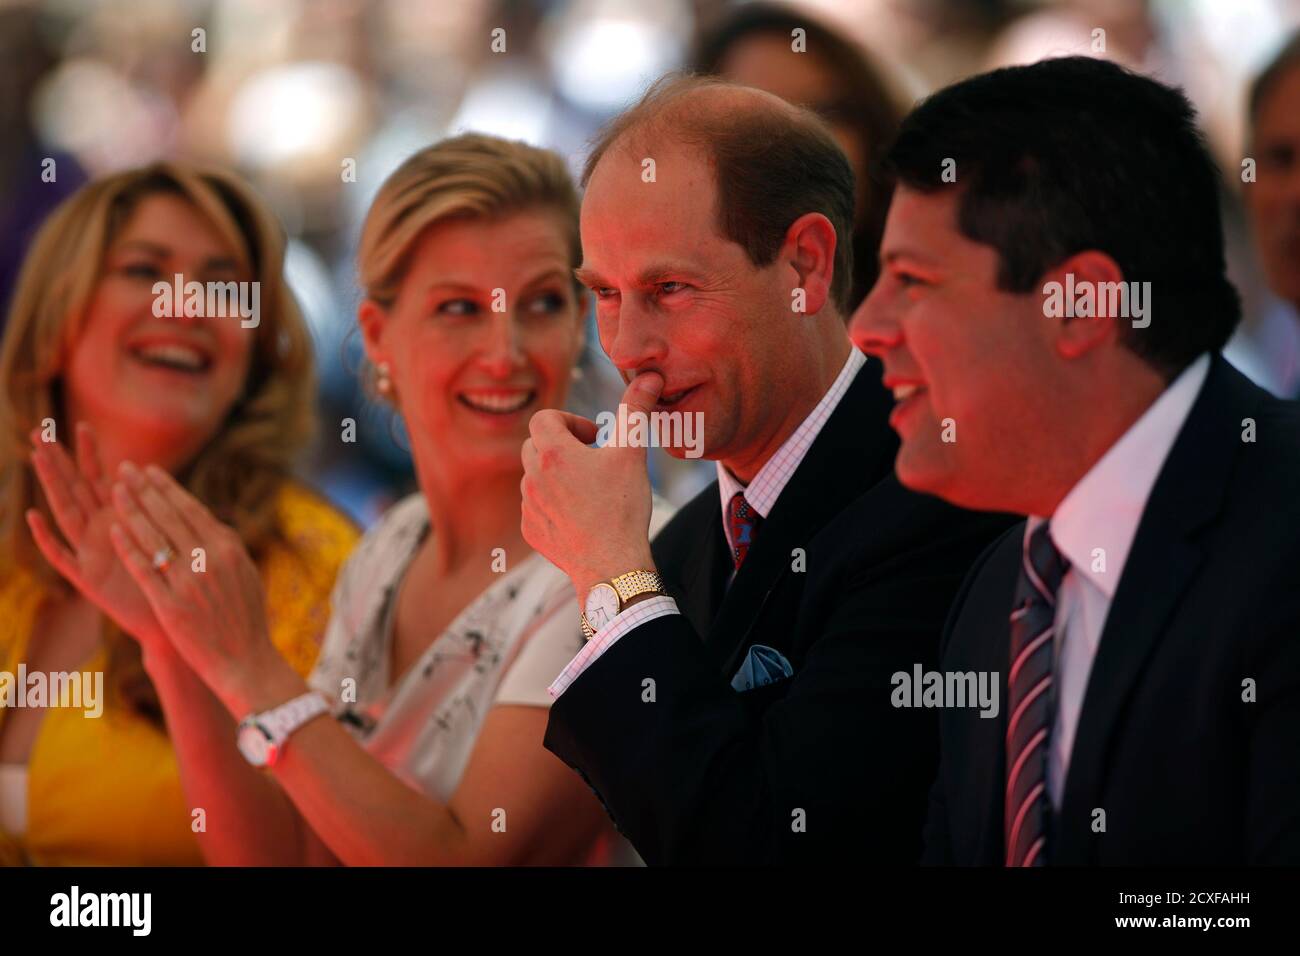 britains-prince-edward-2nd-r-his-wife-countess-of-wessex-sophie-rhys-jones-2nd-l-gibraltar-prime-minister-fabian-picardo-r-and-his-wife-justine-smile-as-they-watch-a-performance-by-the-gibraltar-academy-of-dance-in-downtown-gibraltar-june-11-2012-the-youngest-son-of-queen-elizabeth-ii-prince-edward-and-his-wife-started-the-visit-to-gibraltar-on-monday-to-take-part-in-celebrations-for-queen-elizabeths-diamond-jubilee-a-journey-that-has-bothered-the-spanish-government-after-recent-incidents-with-fishermen-in-the-area-reutersjon-nazca-gibraltar-tags-royals-society-politics-2CXFAHH.jpg